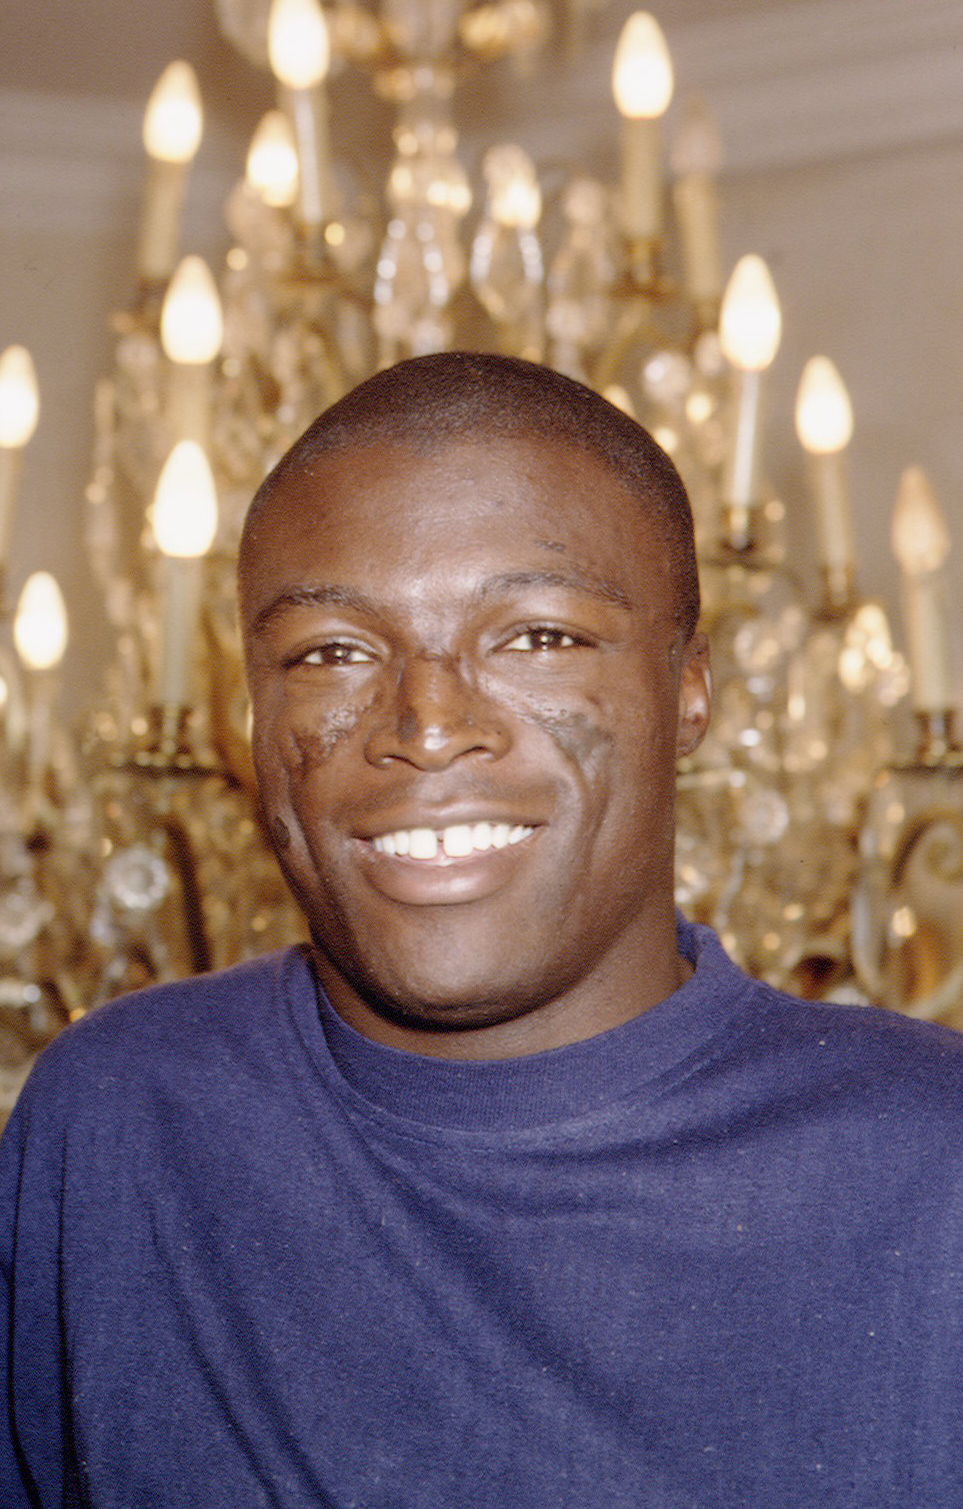 Seal, circa 1994. | Source: Getty Images